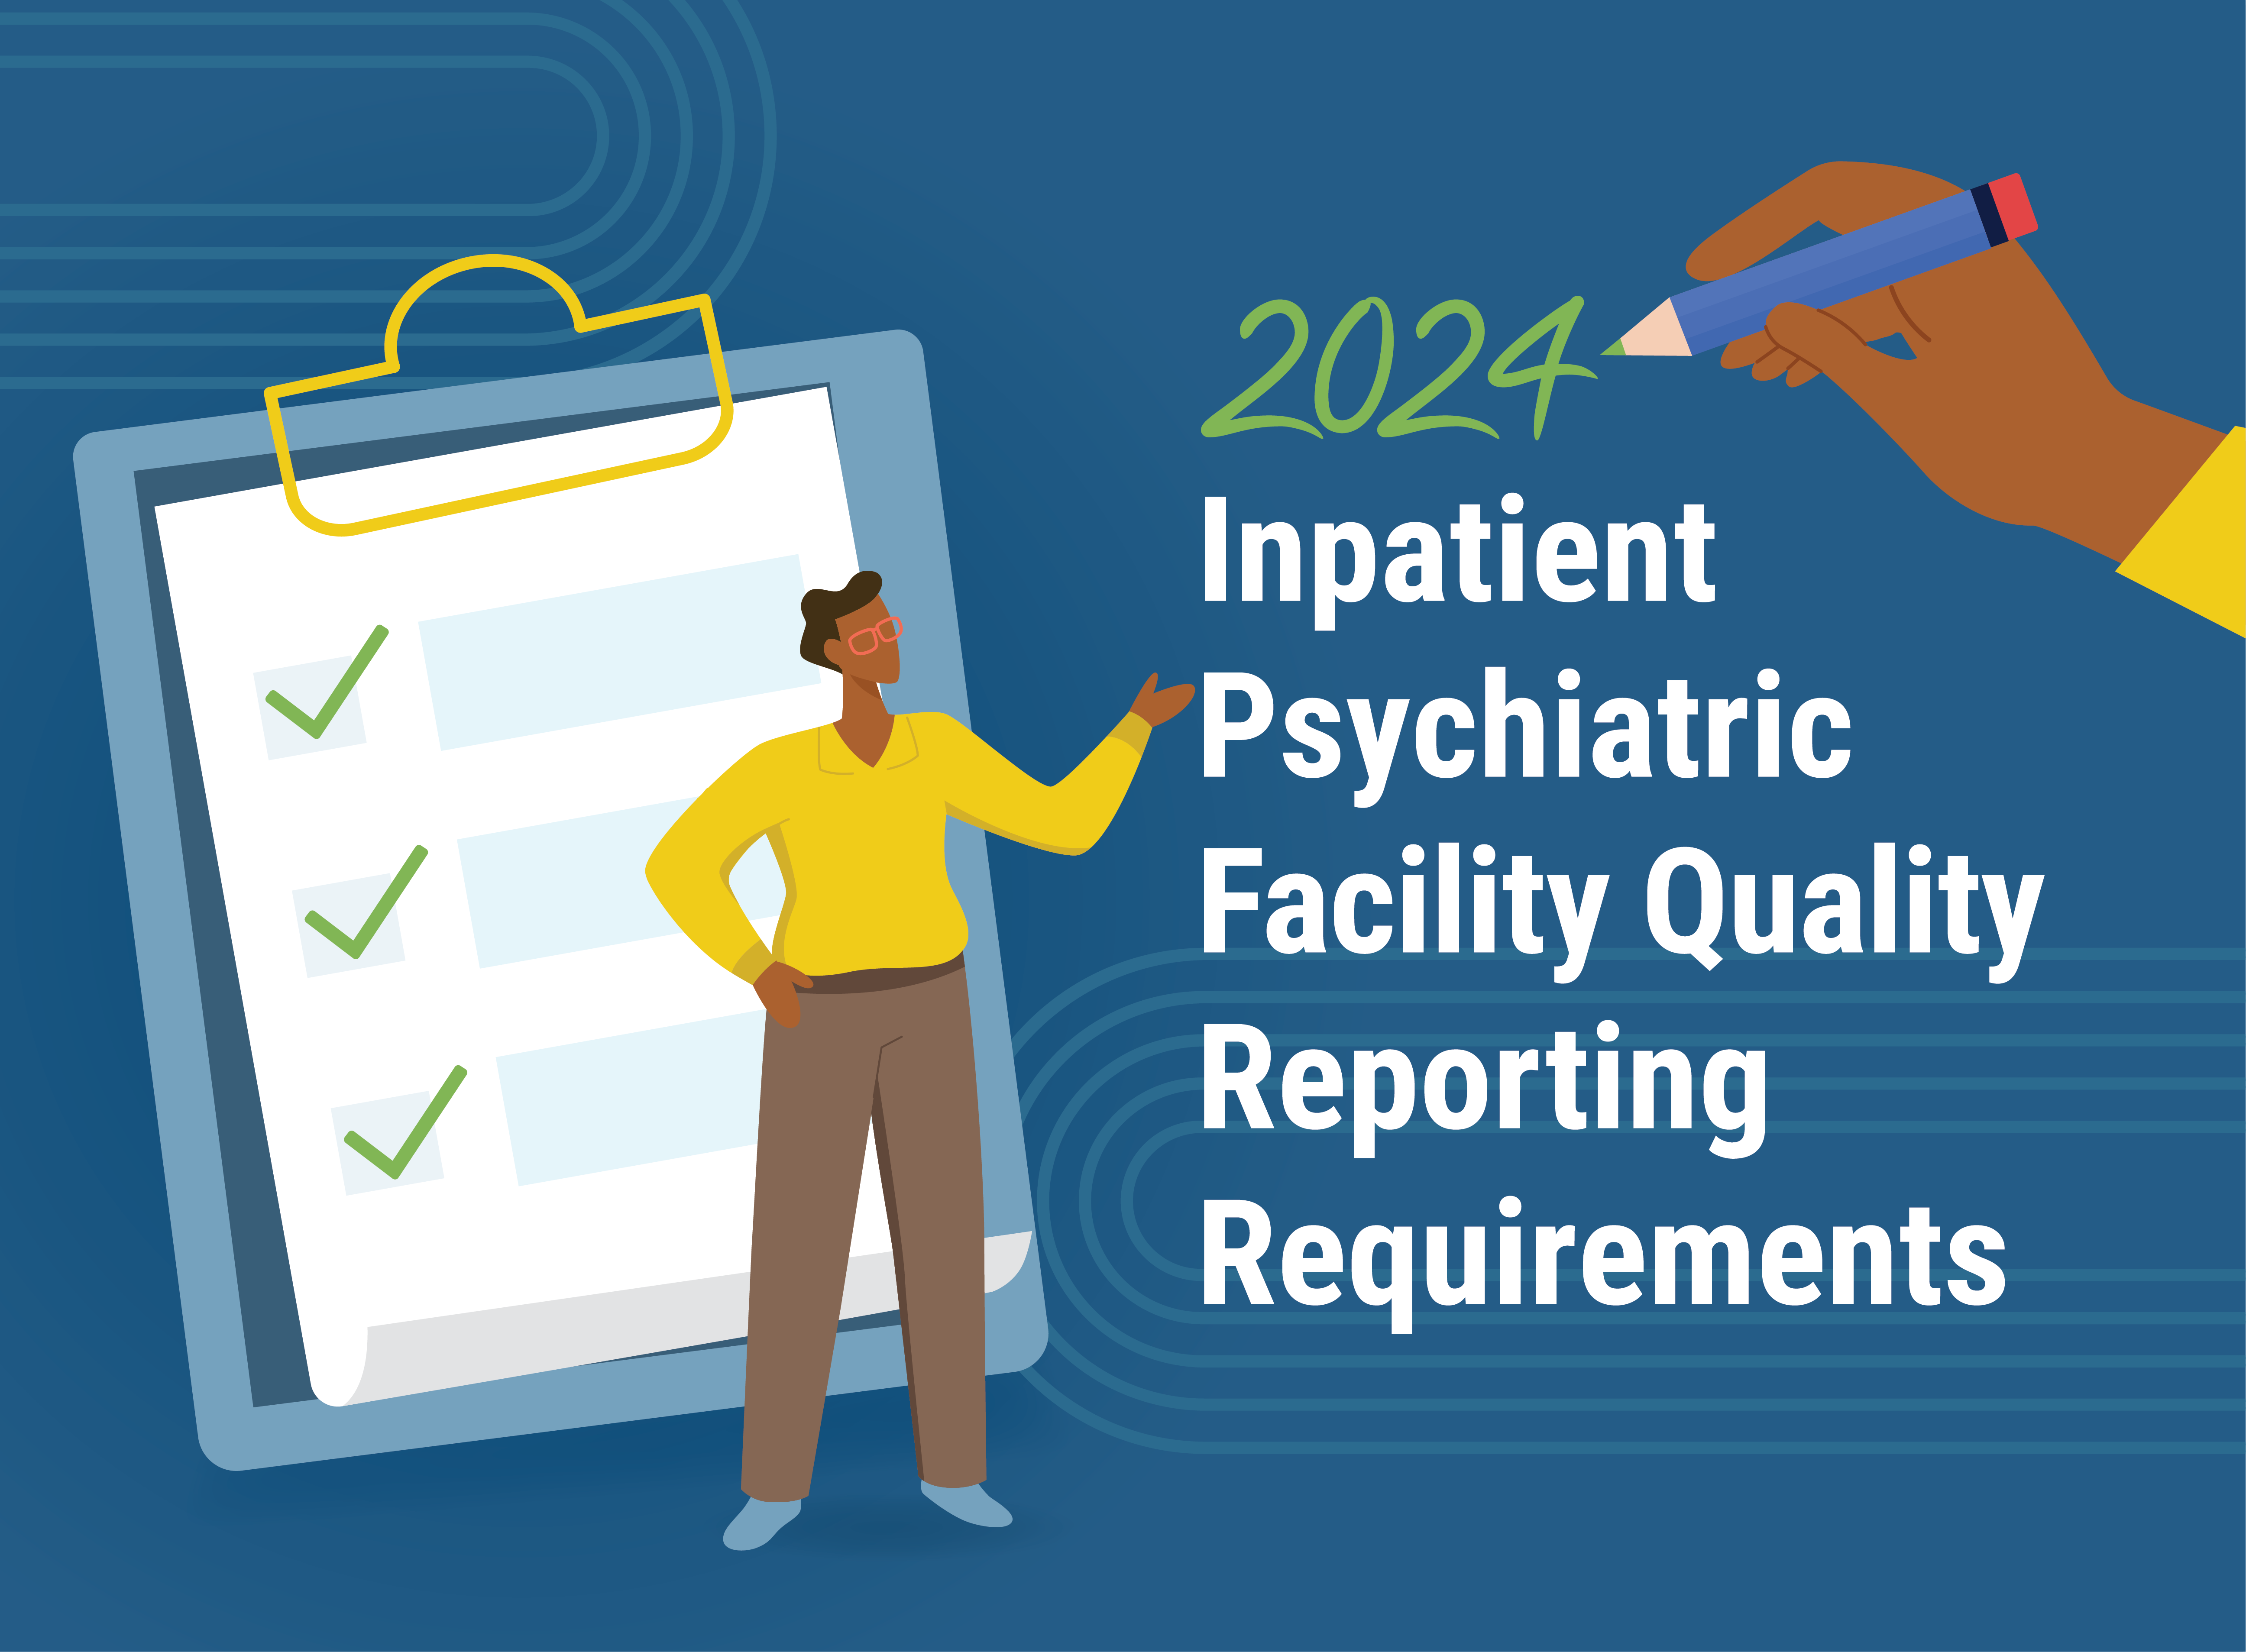 2024 IPFQR Reporting Requirements